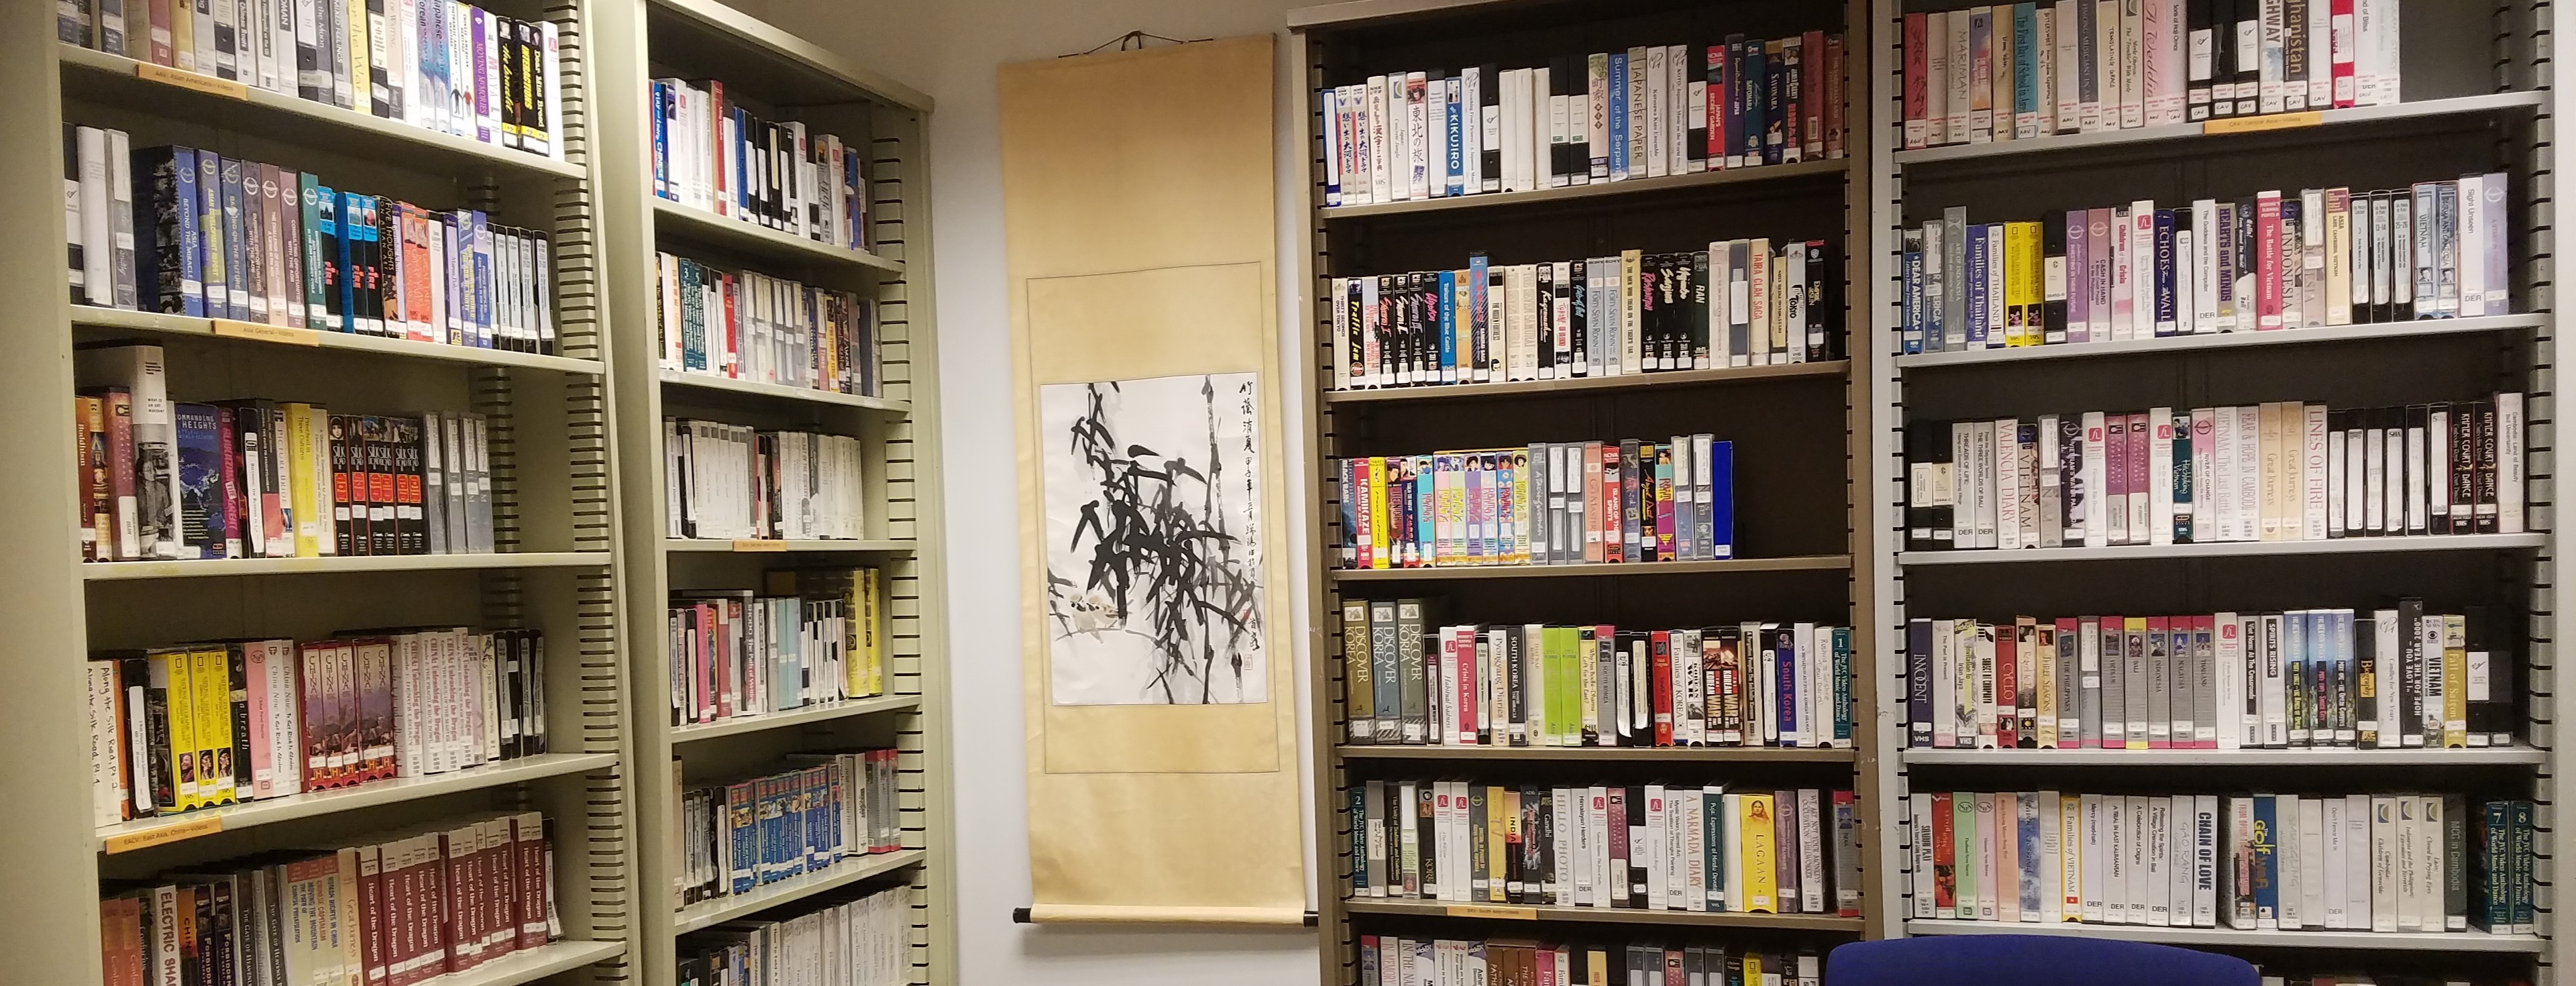 AEMS Library bookshelves with a hanging scroll on the wall.